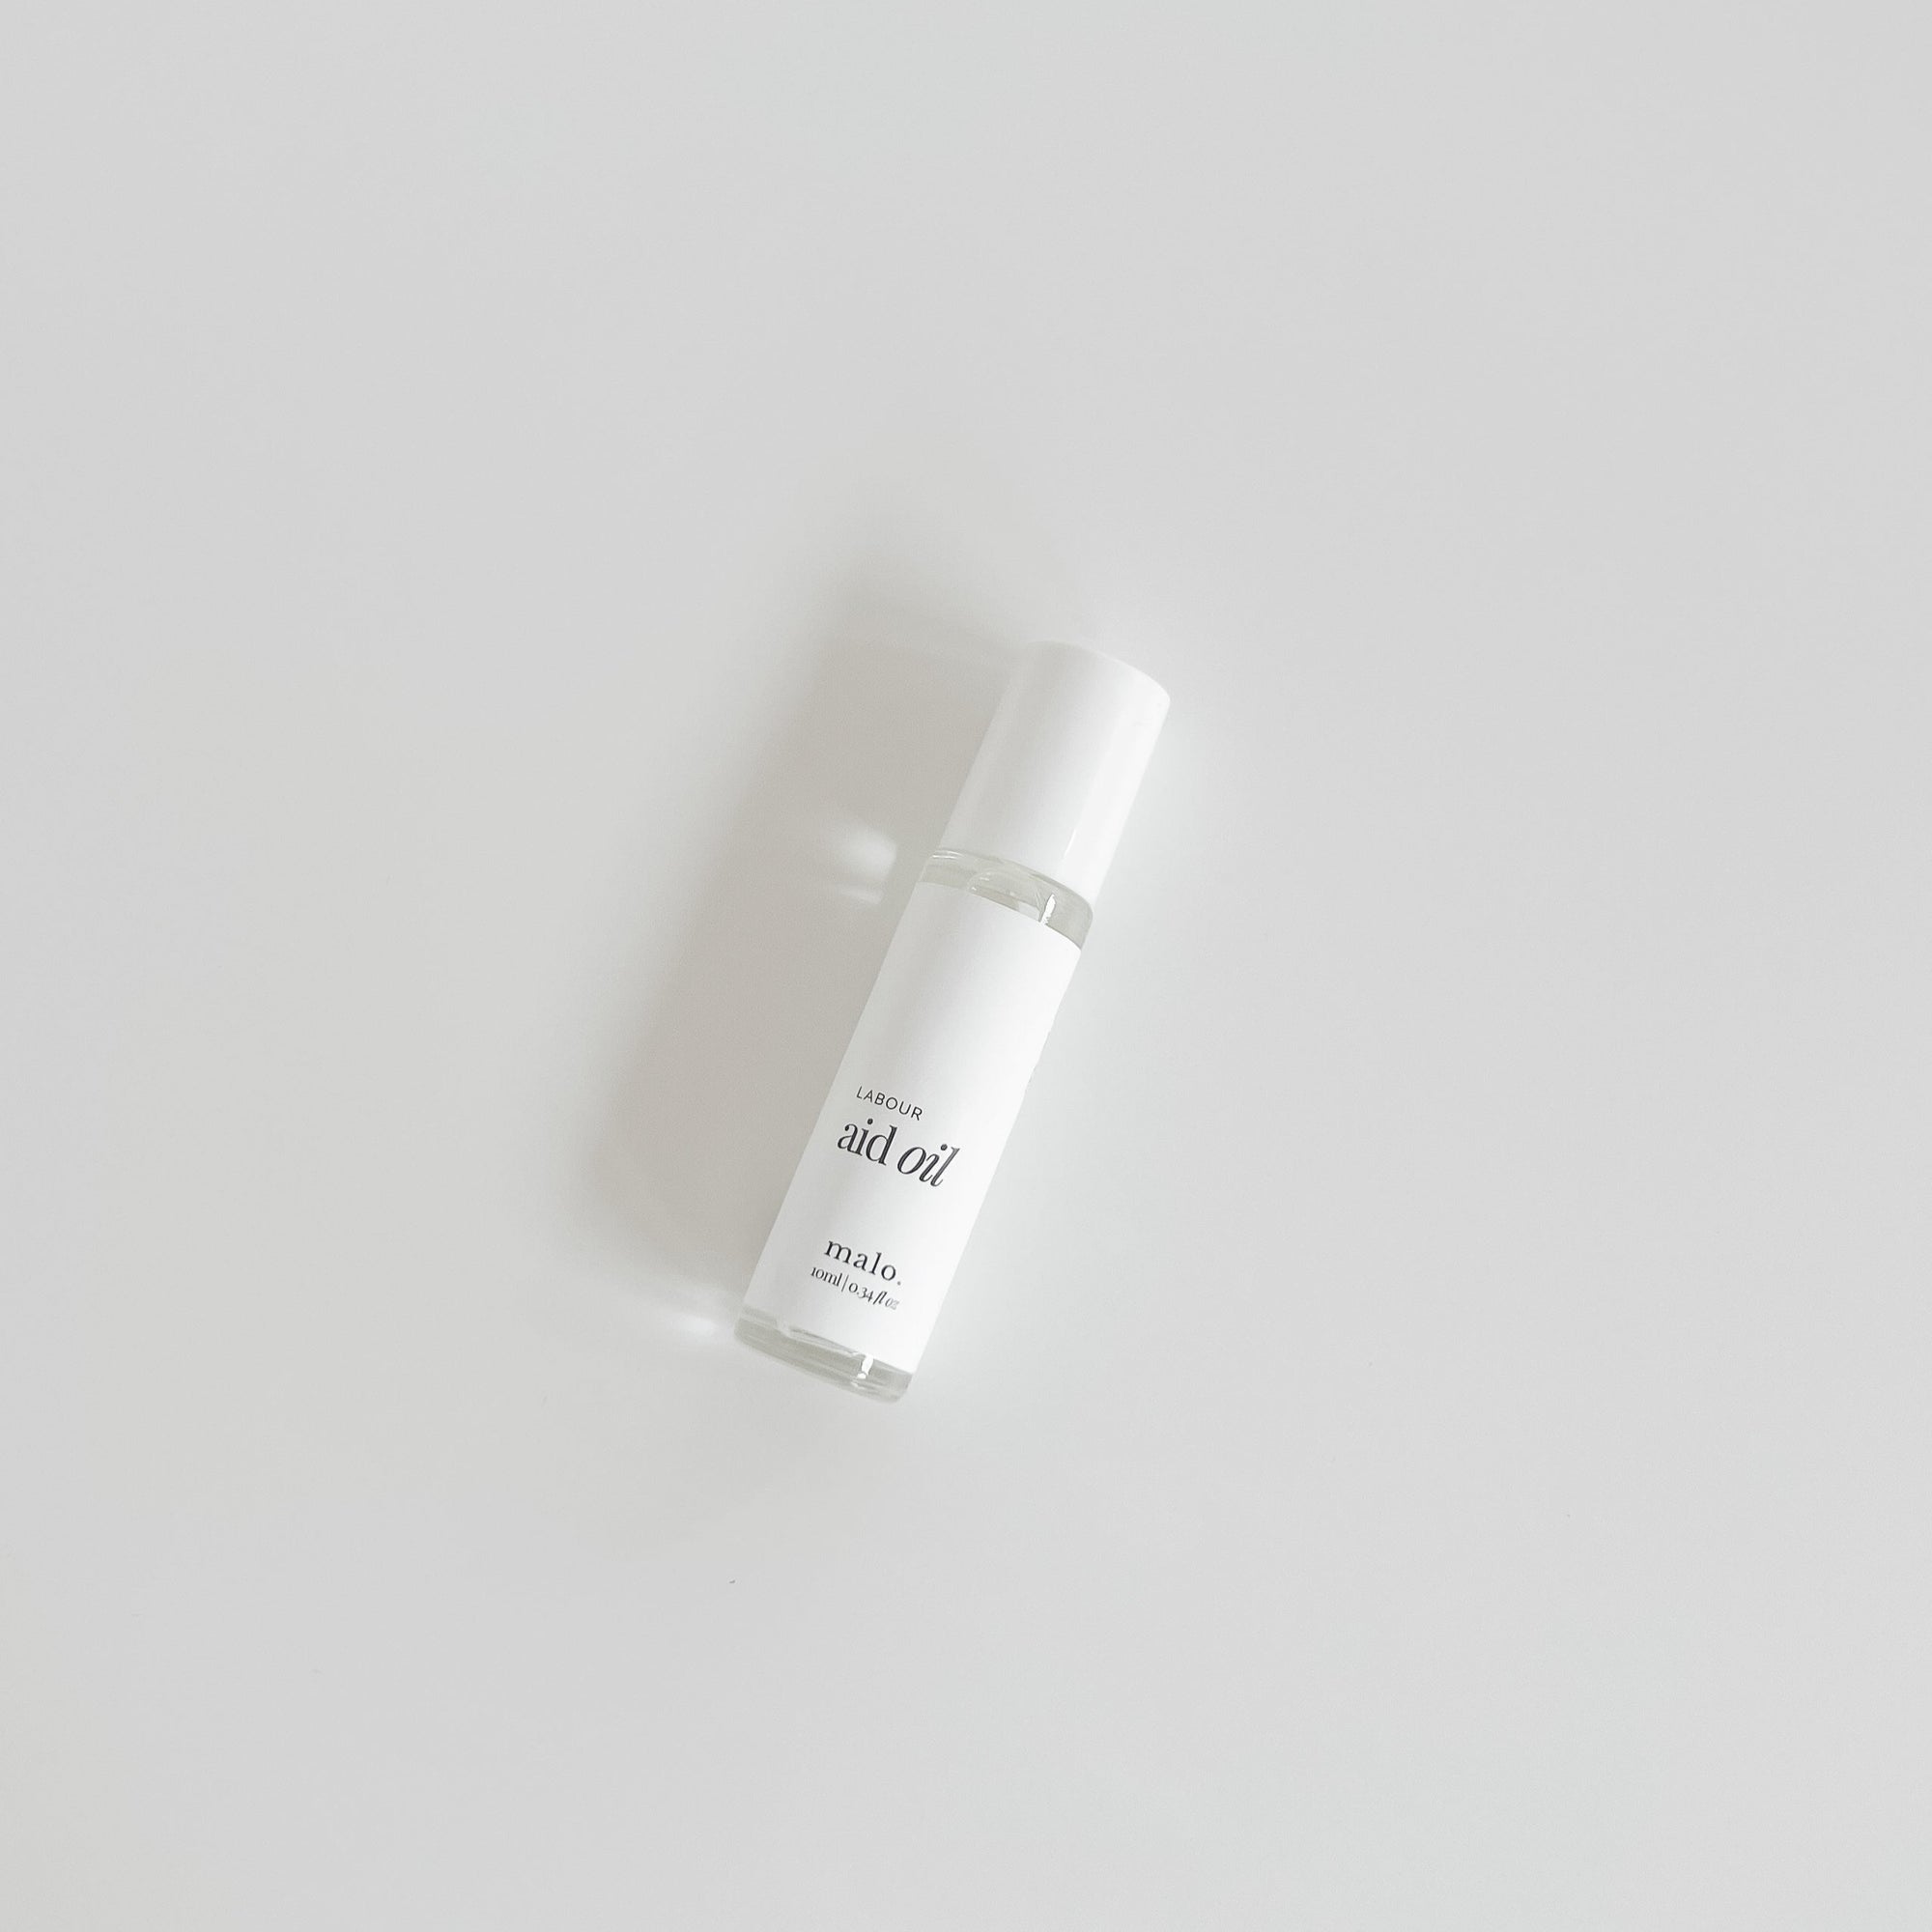 A bottle of Malo The Label skincare product containing Coconut Oil, placed on a plain white background.